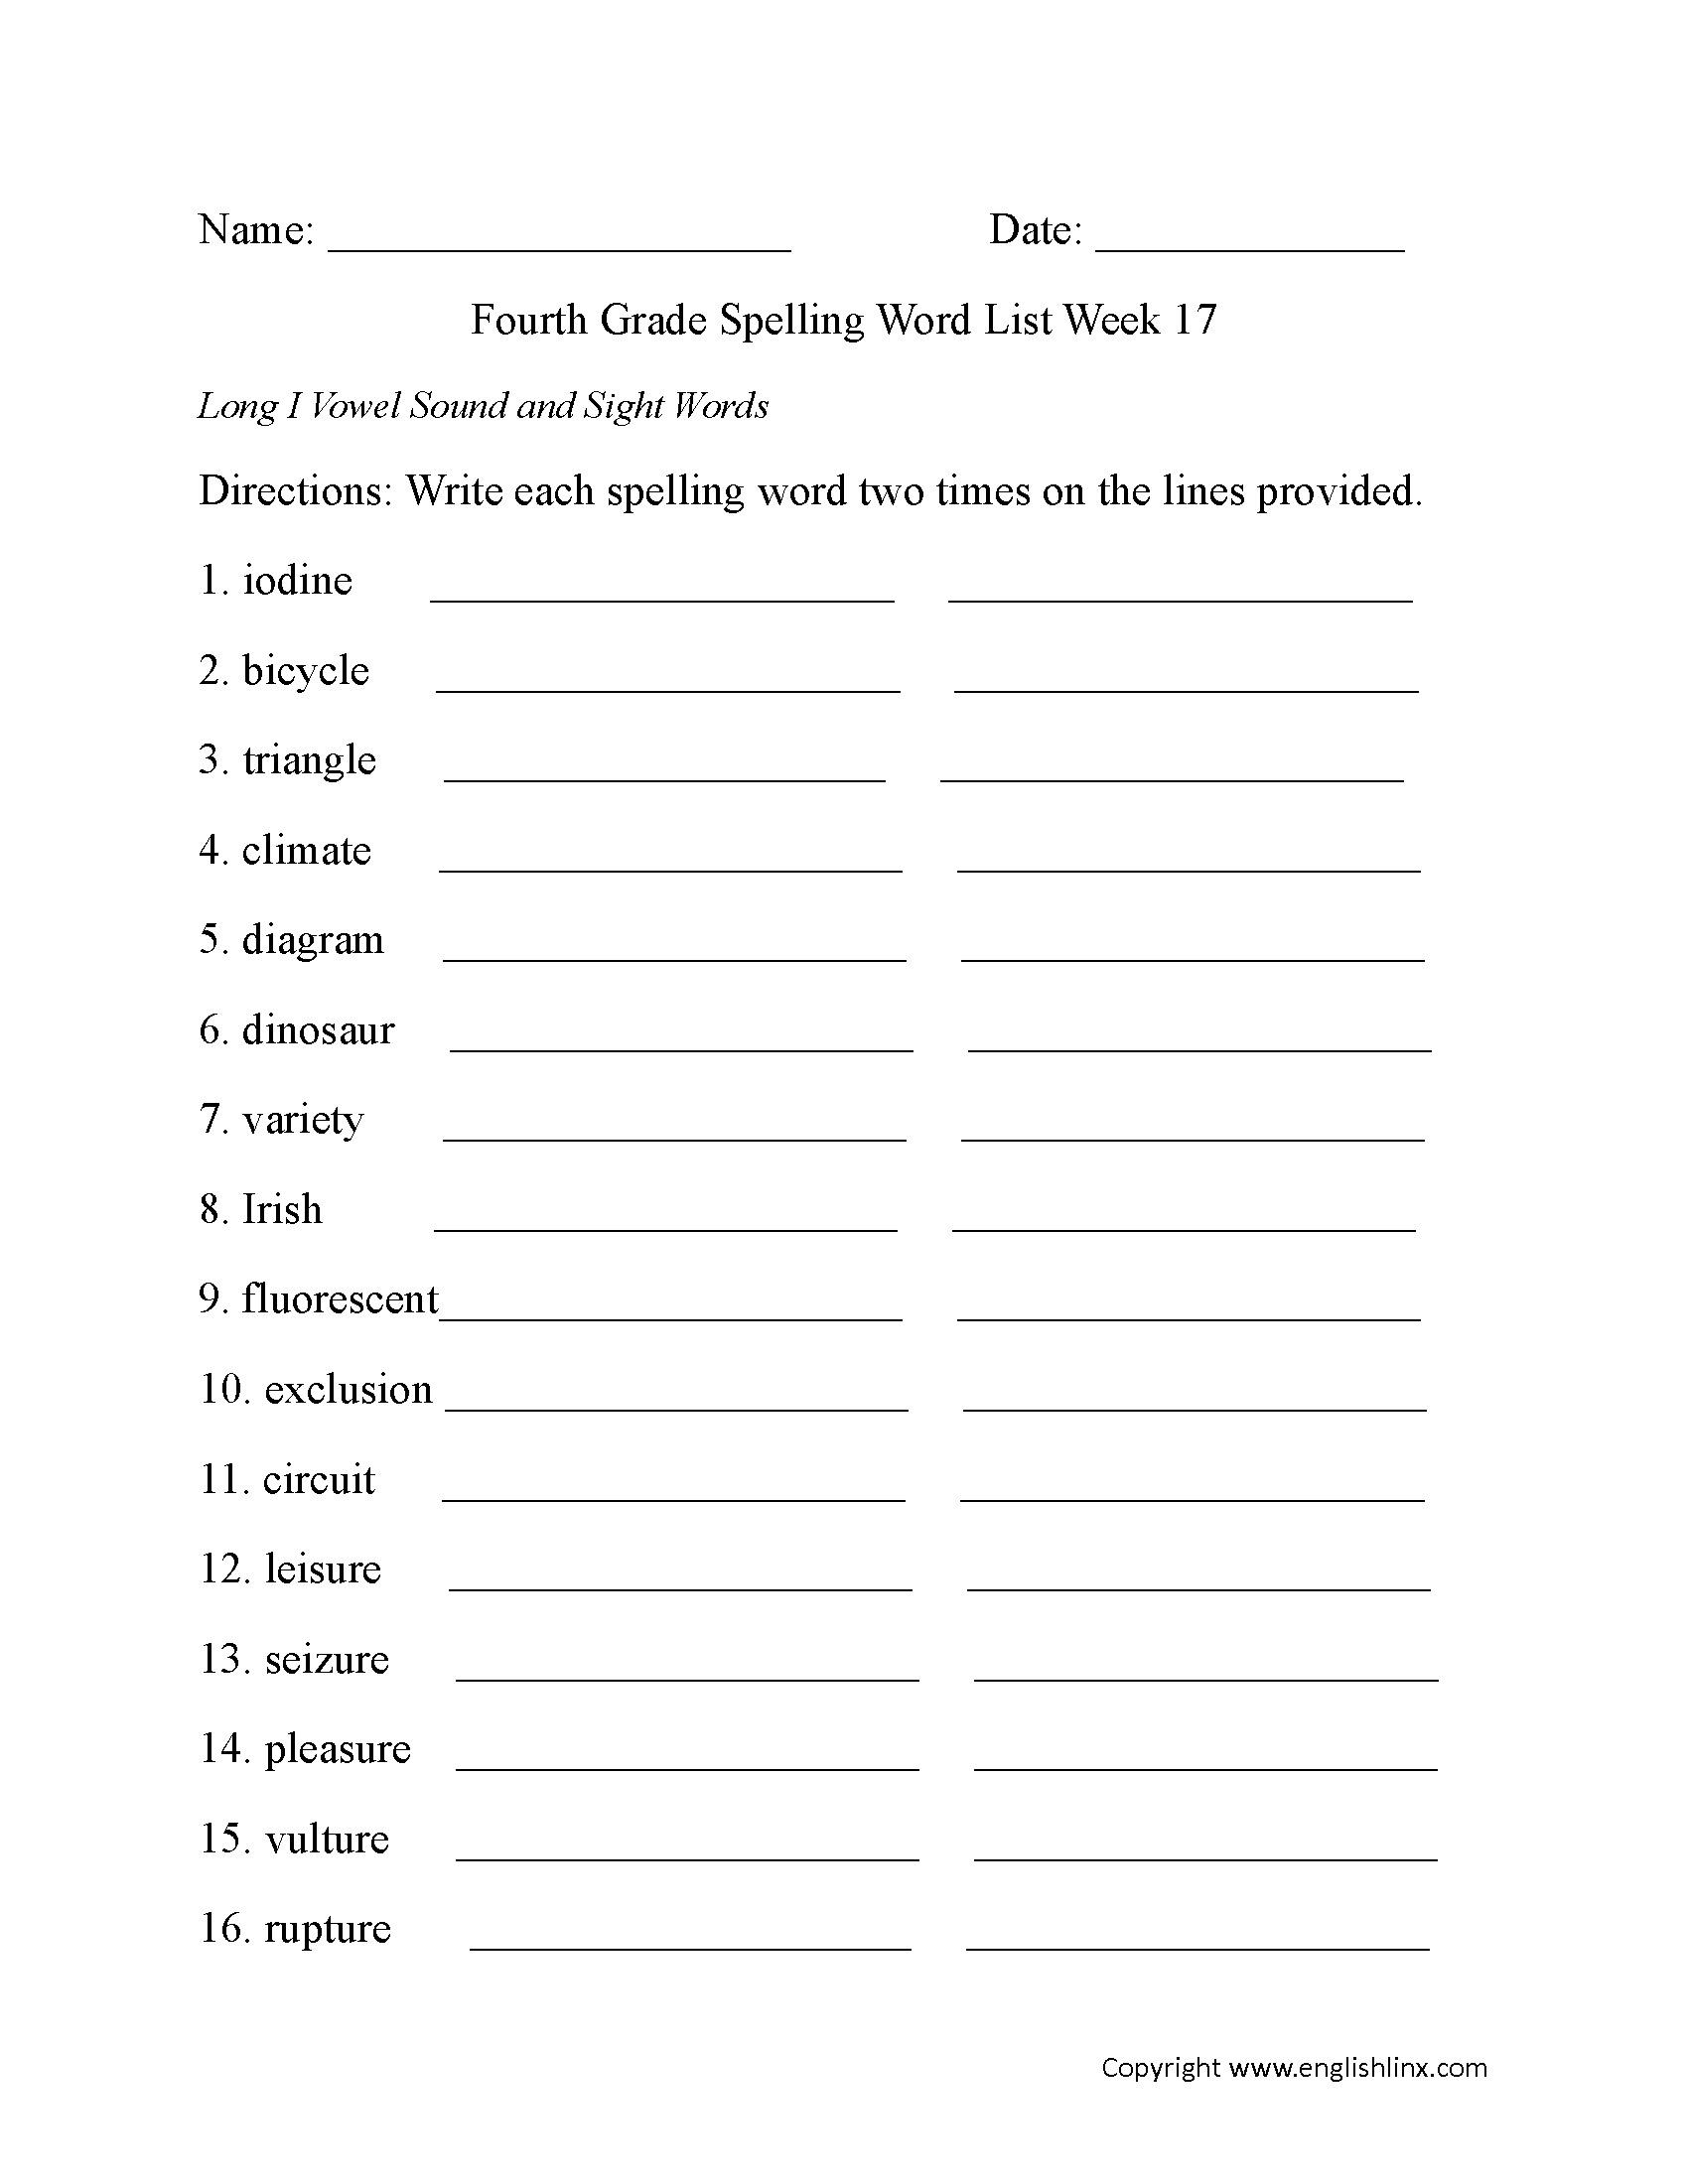 Week 17 Long I Vowel and Sight Words Fourth Grade Spelling Words Worksheets